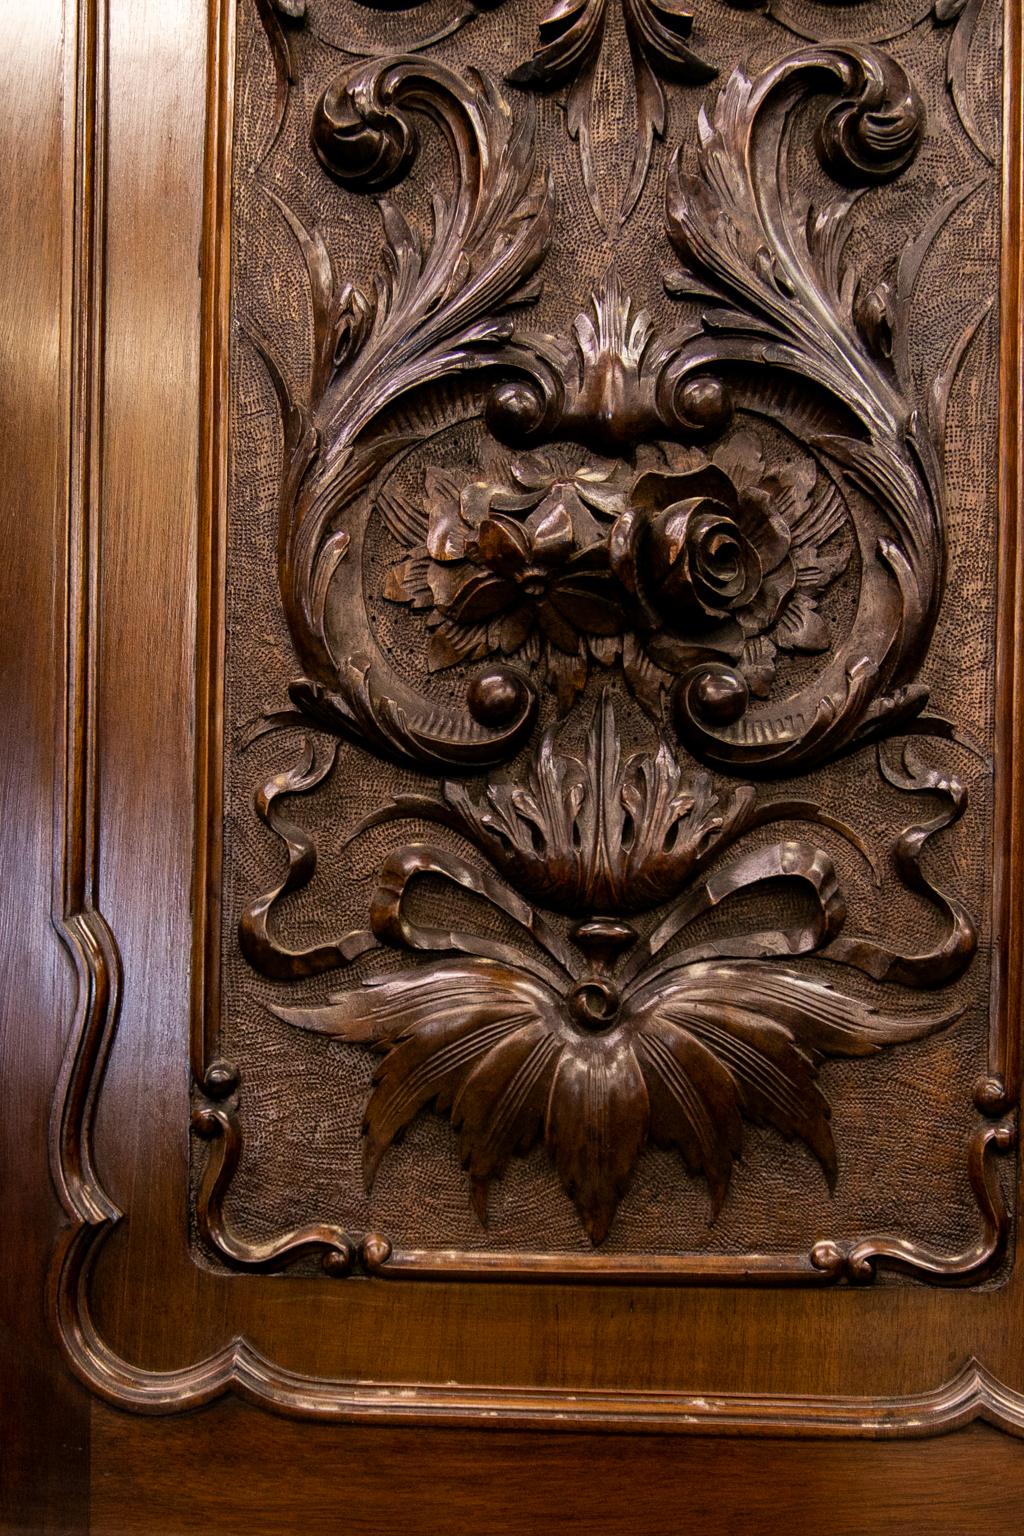 English Solid Mahogany Armoire, has extraordinary carved details in very high relief. The doors have shaped beveled mirrors, and the upper center section has removable pullout / pull-out trays. The drawers are lined with heavy solid mahogany. The